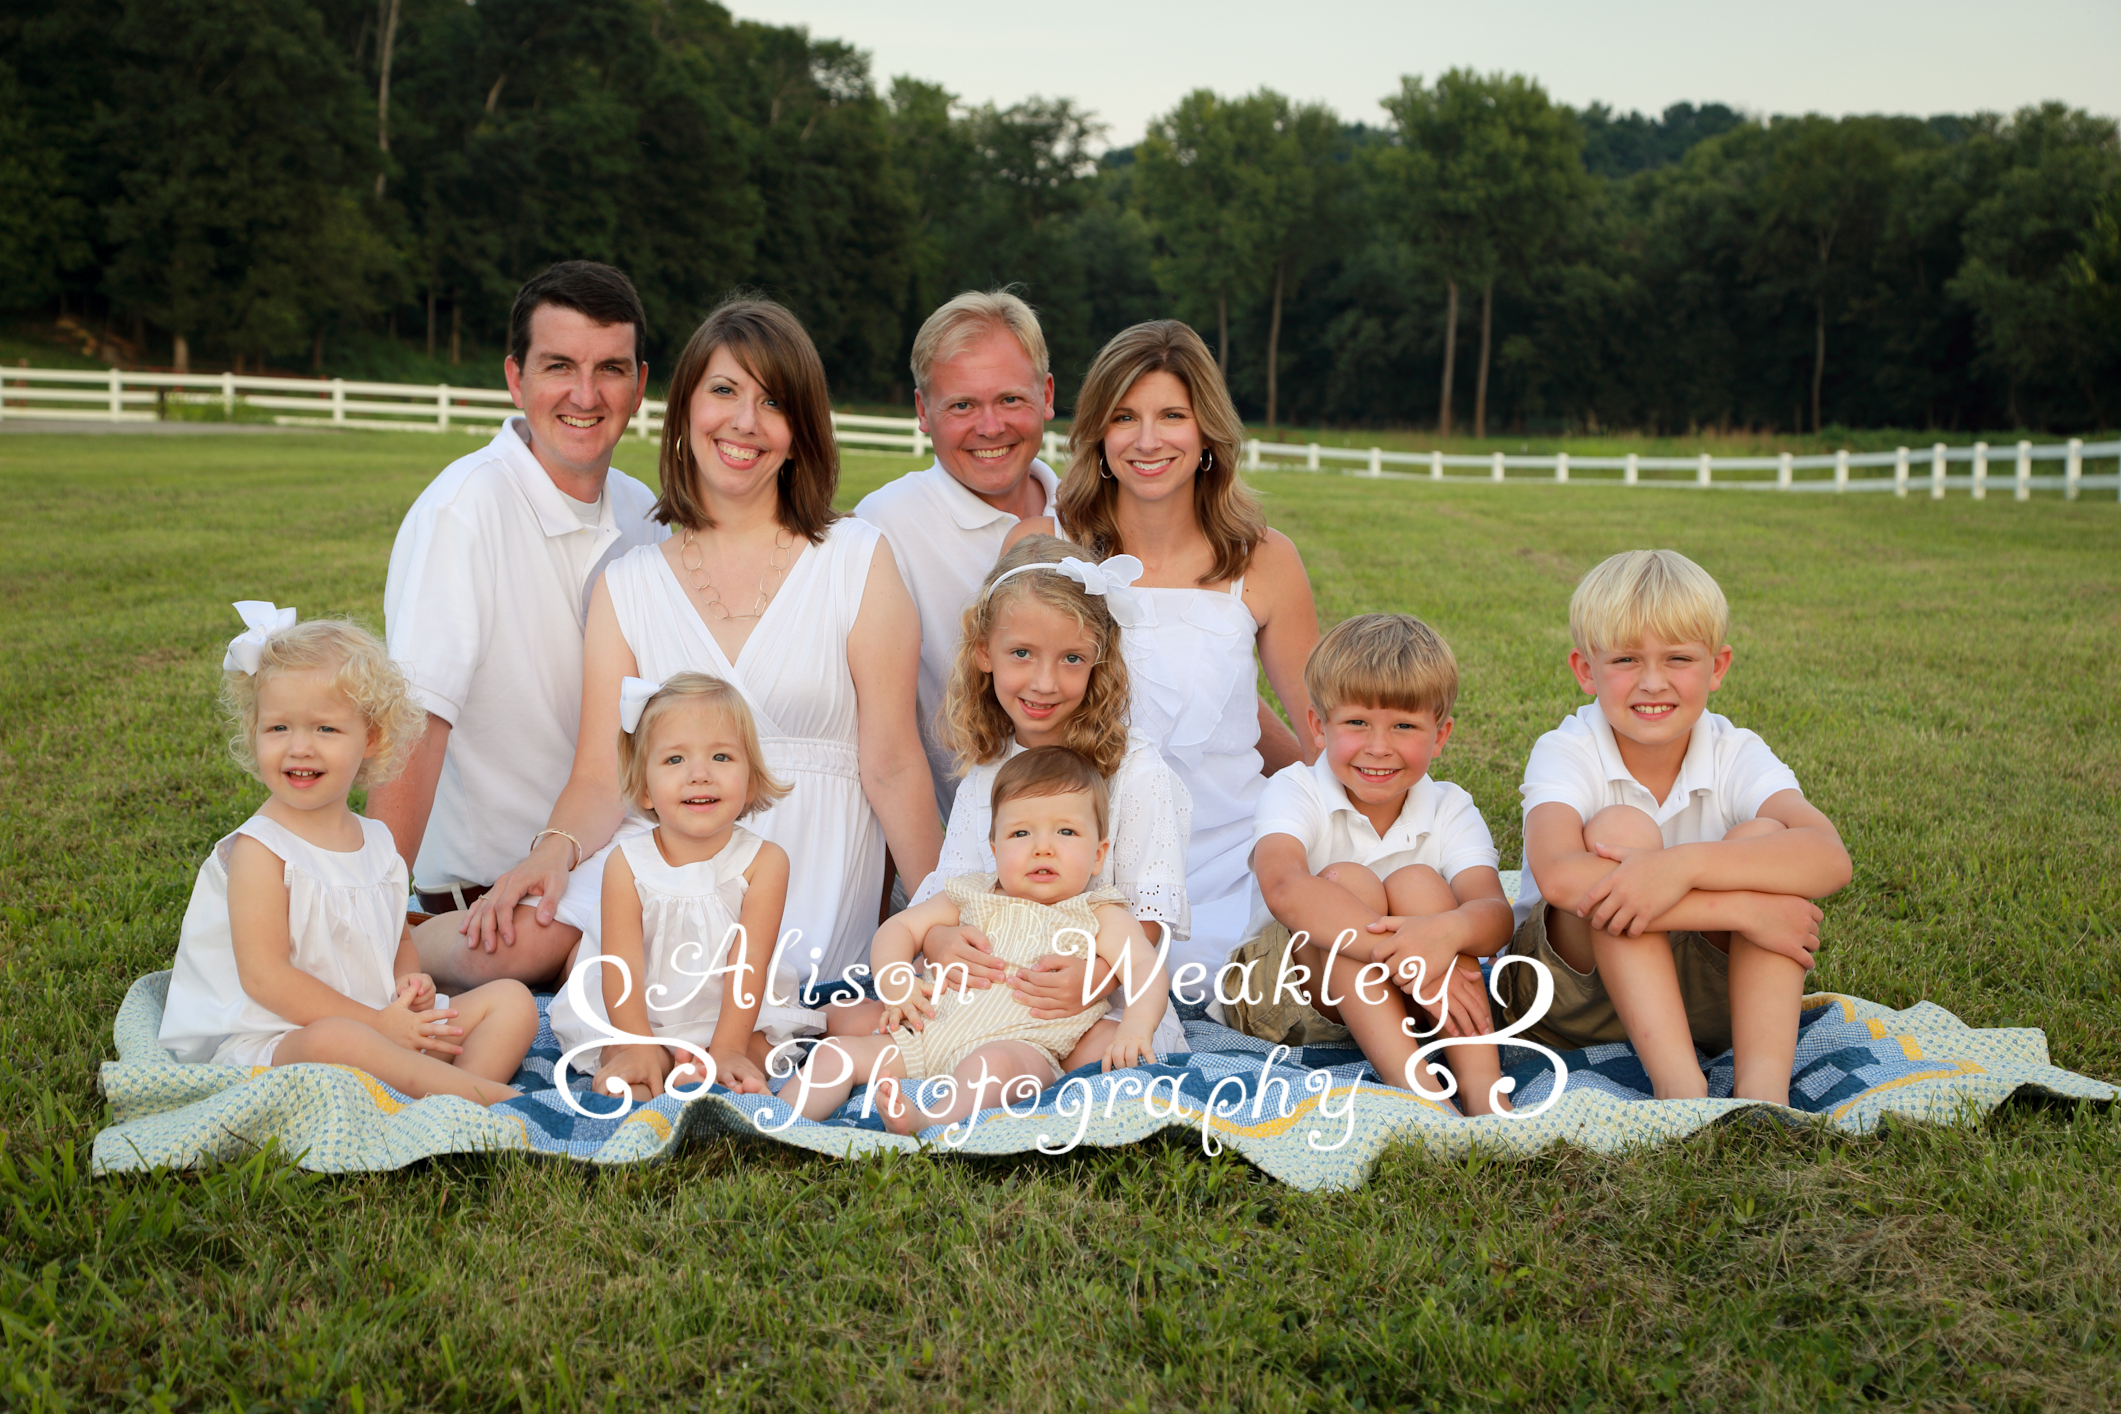 The {J} families – Alison Weakley Photography